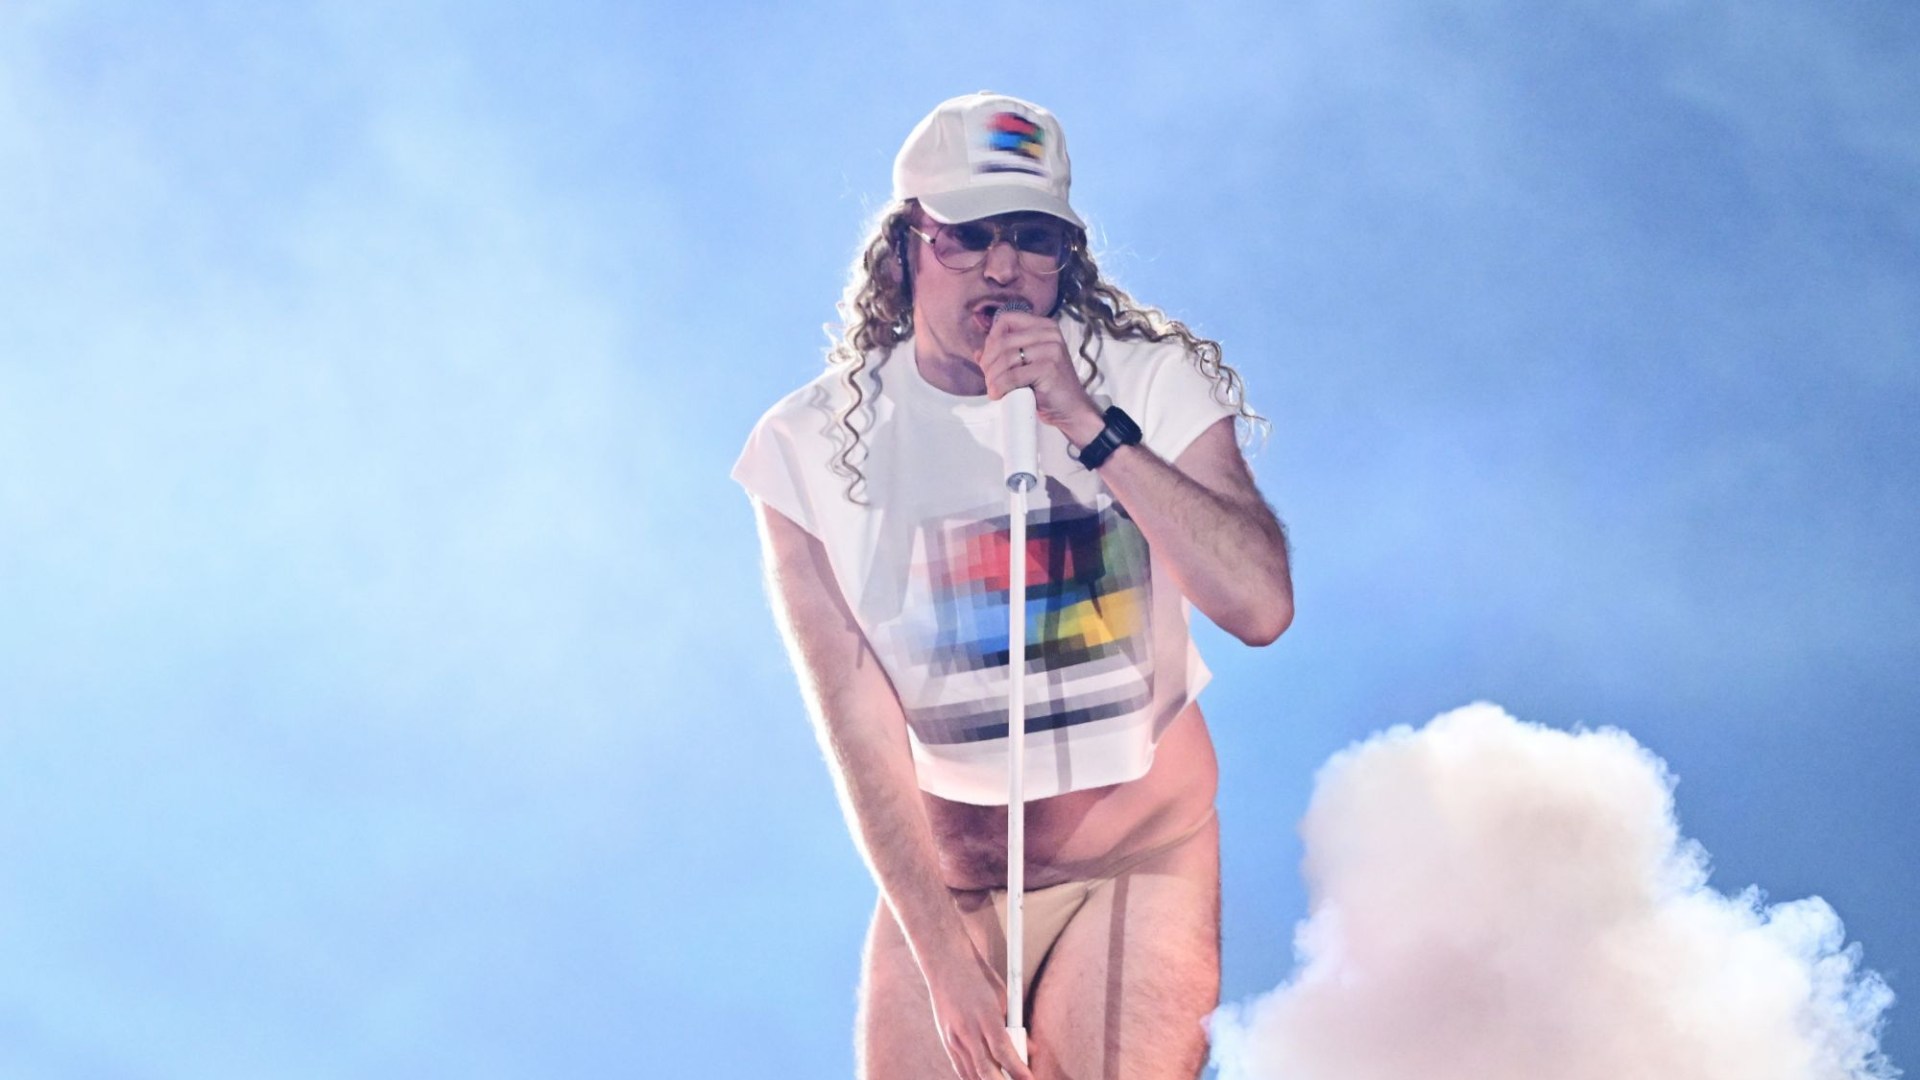 ‘Put some trousers on’ beg Eurovision fans as Finland’s entry appears naked throughout performance [Video]